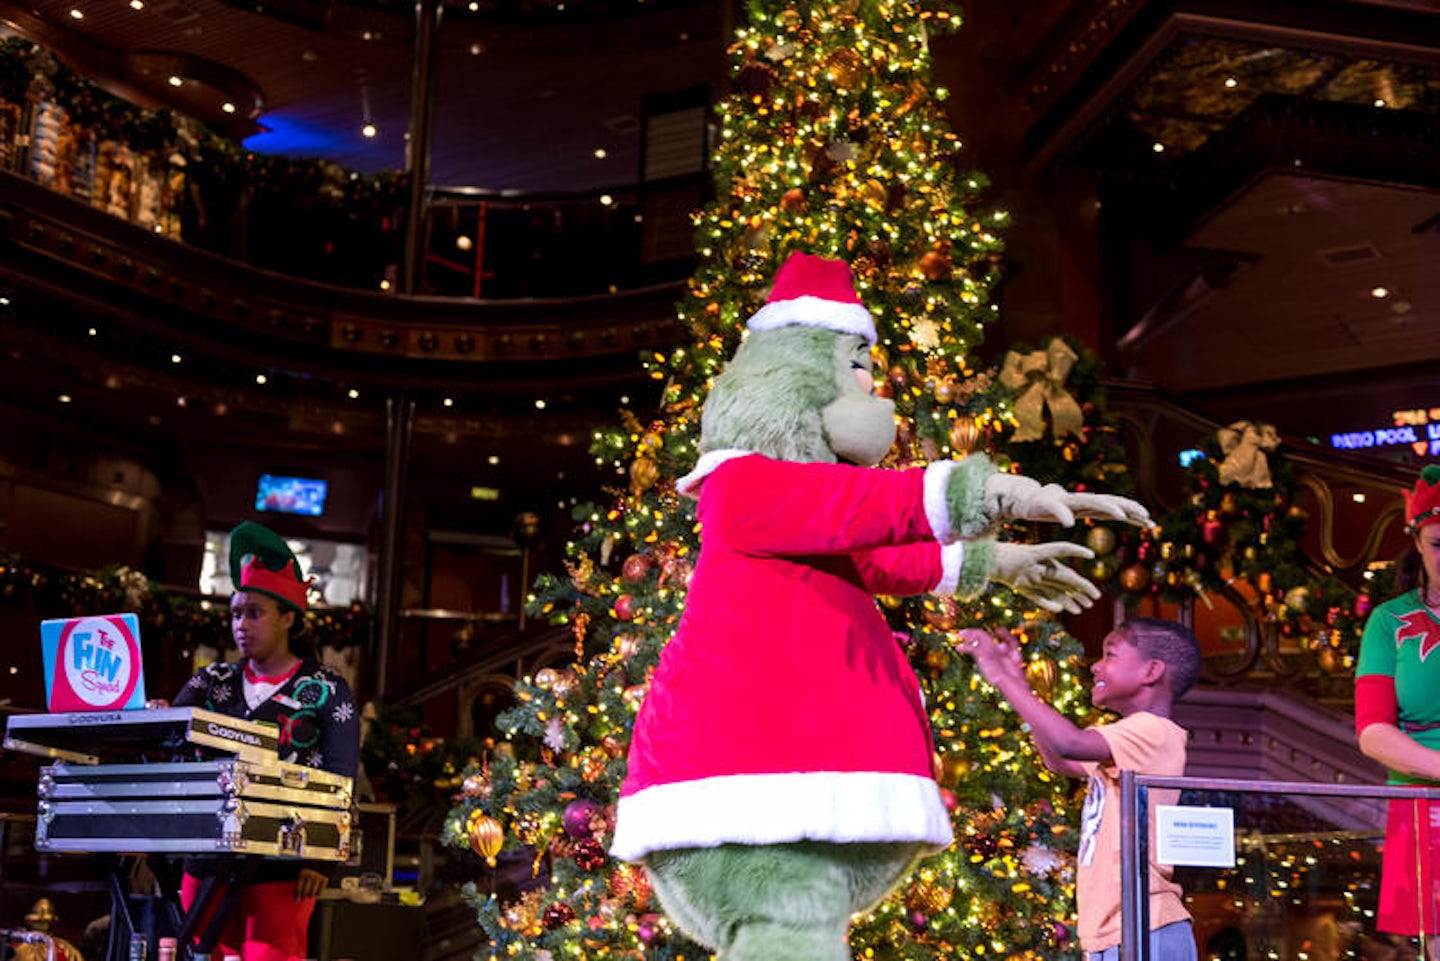 The Grinch Christmas Event in the Atrium on Carnival Elation